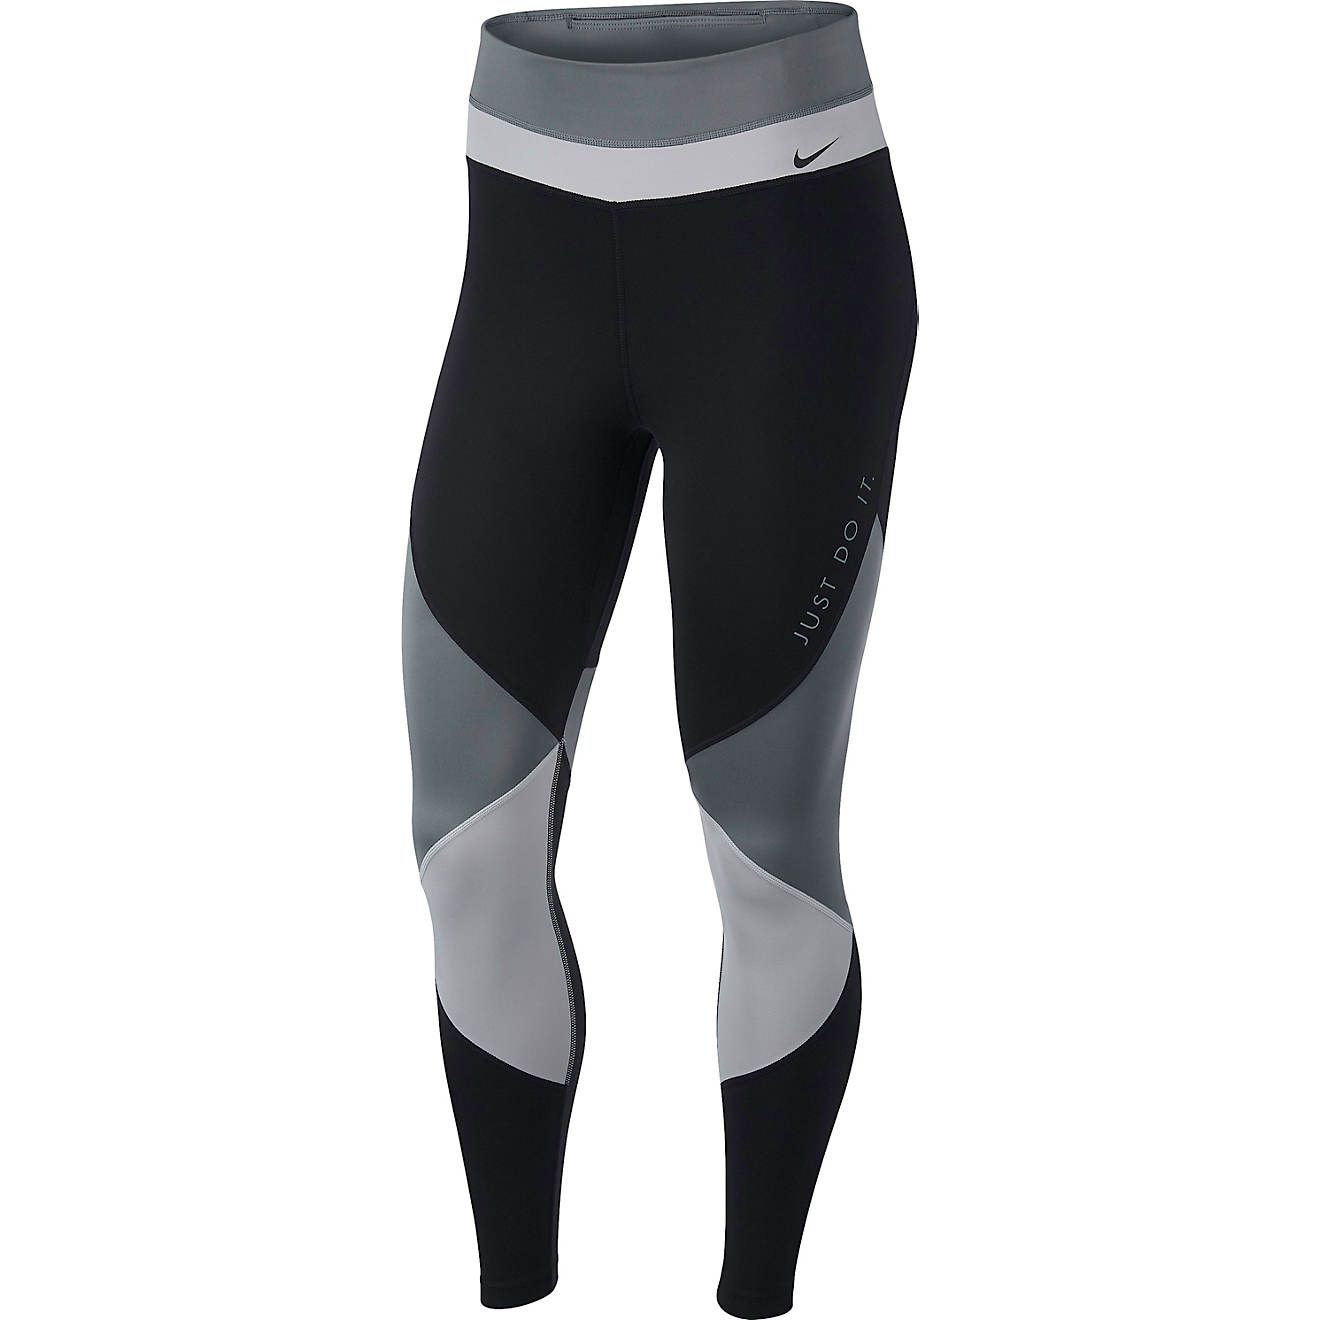 Nike Women's Nike One 7/8 Colorblock Tights | Academy Sports + Outdoor Affiliate